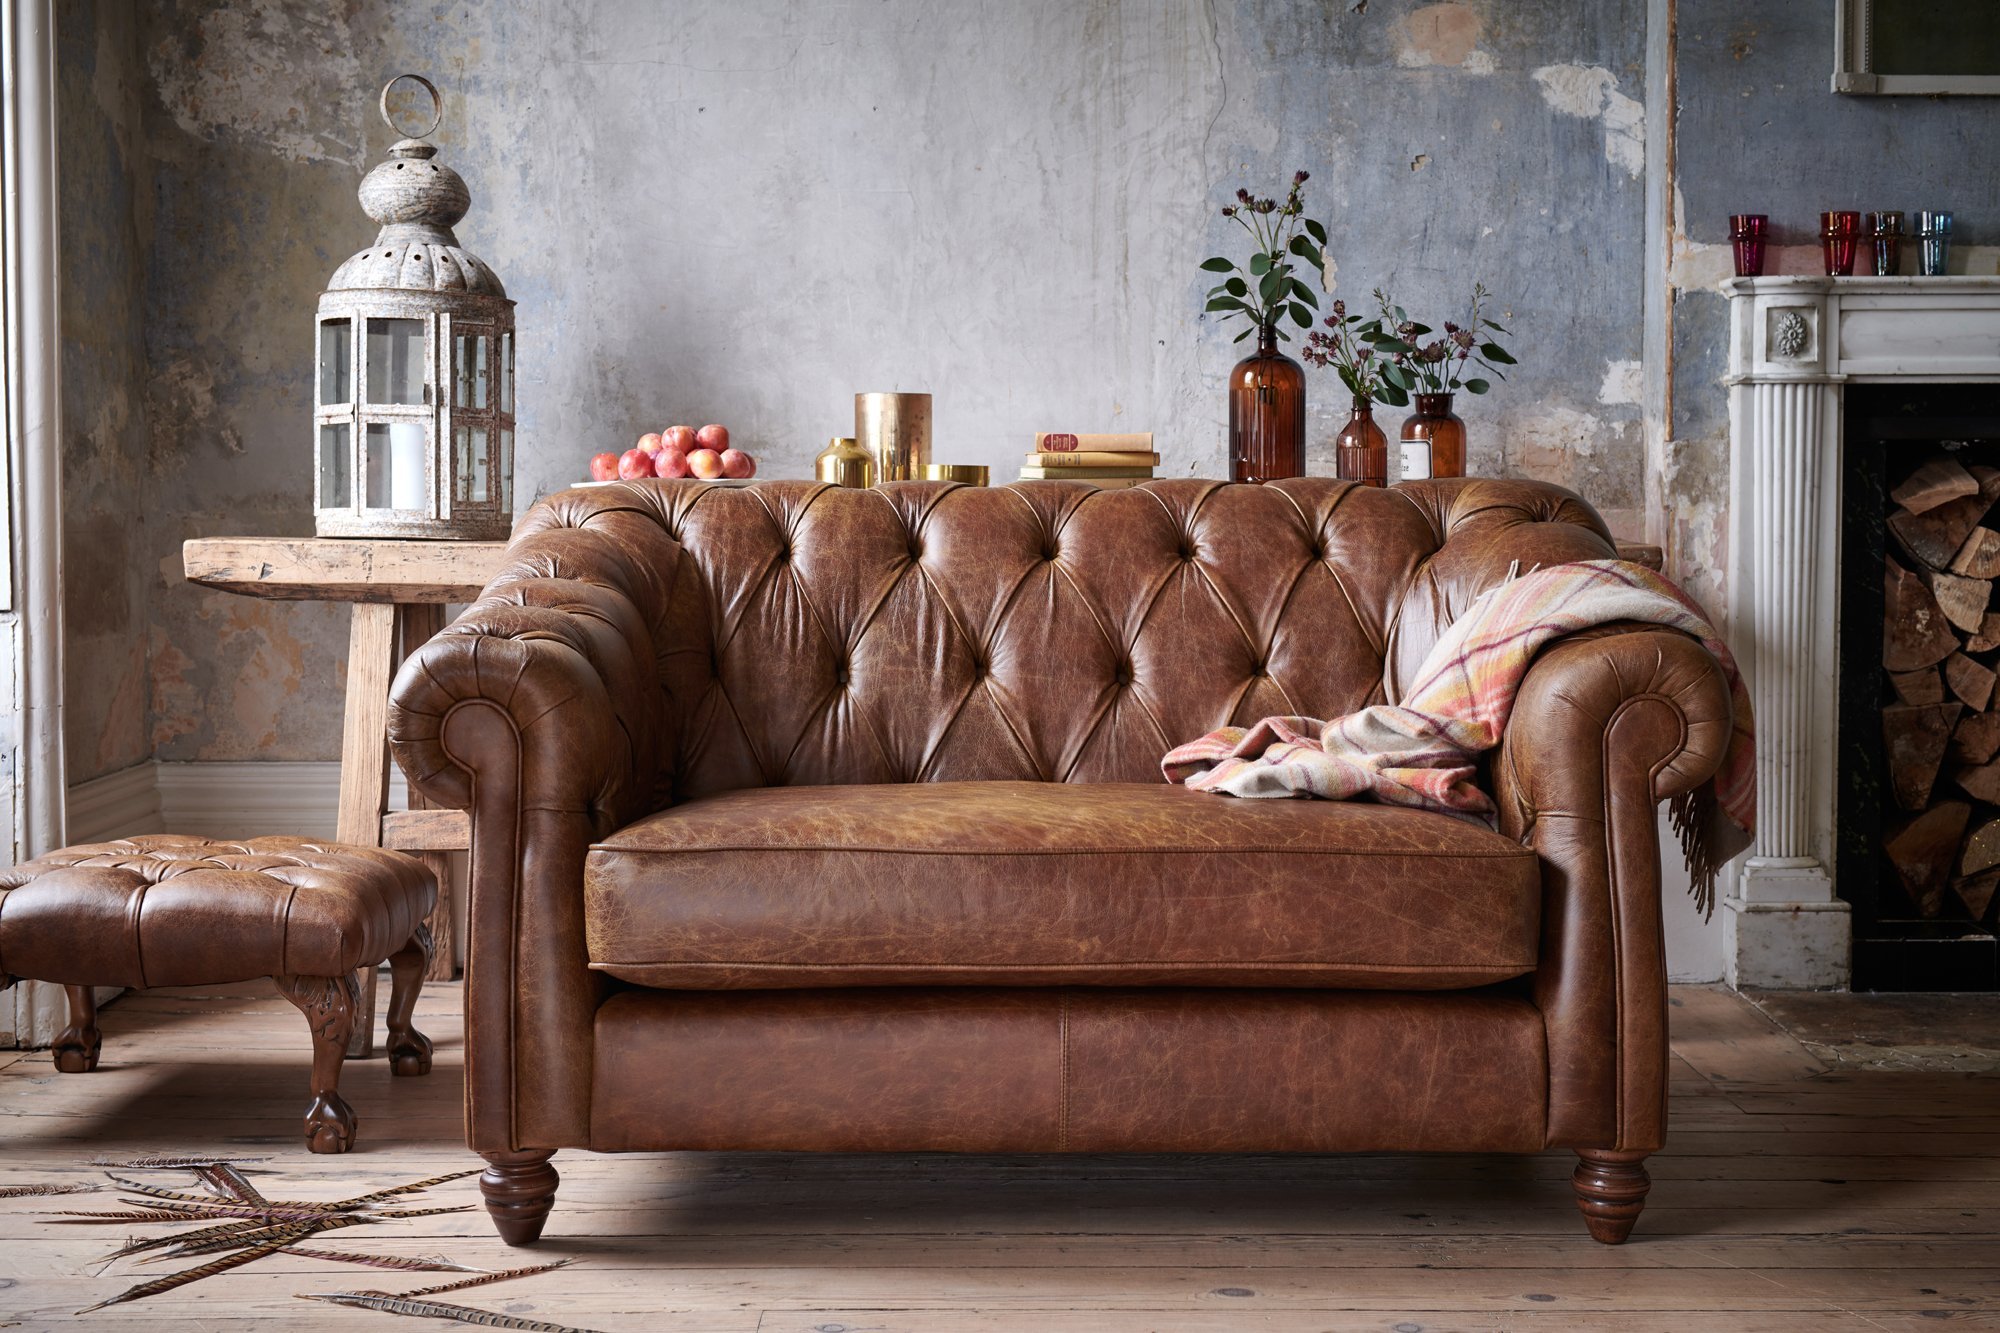 Tips To Keep Your Leather Sofa Looking, Best Leather Couches For The Money